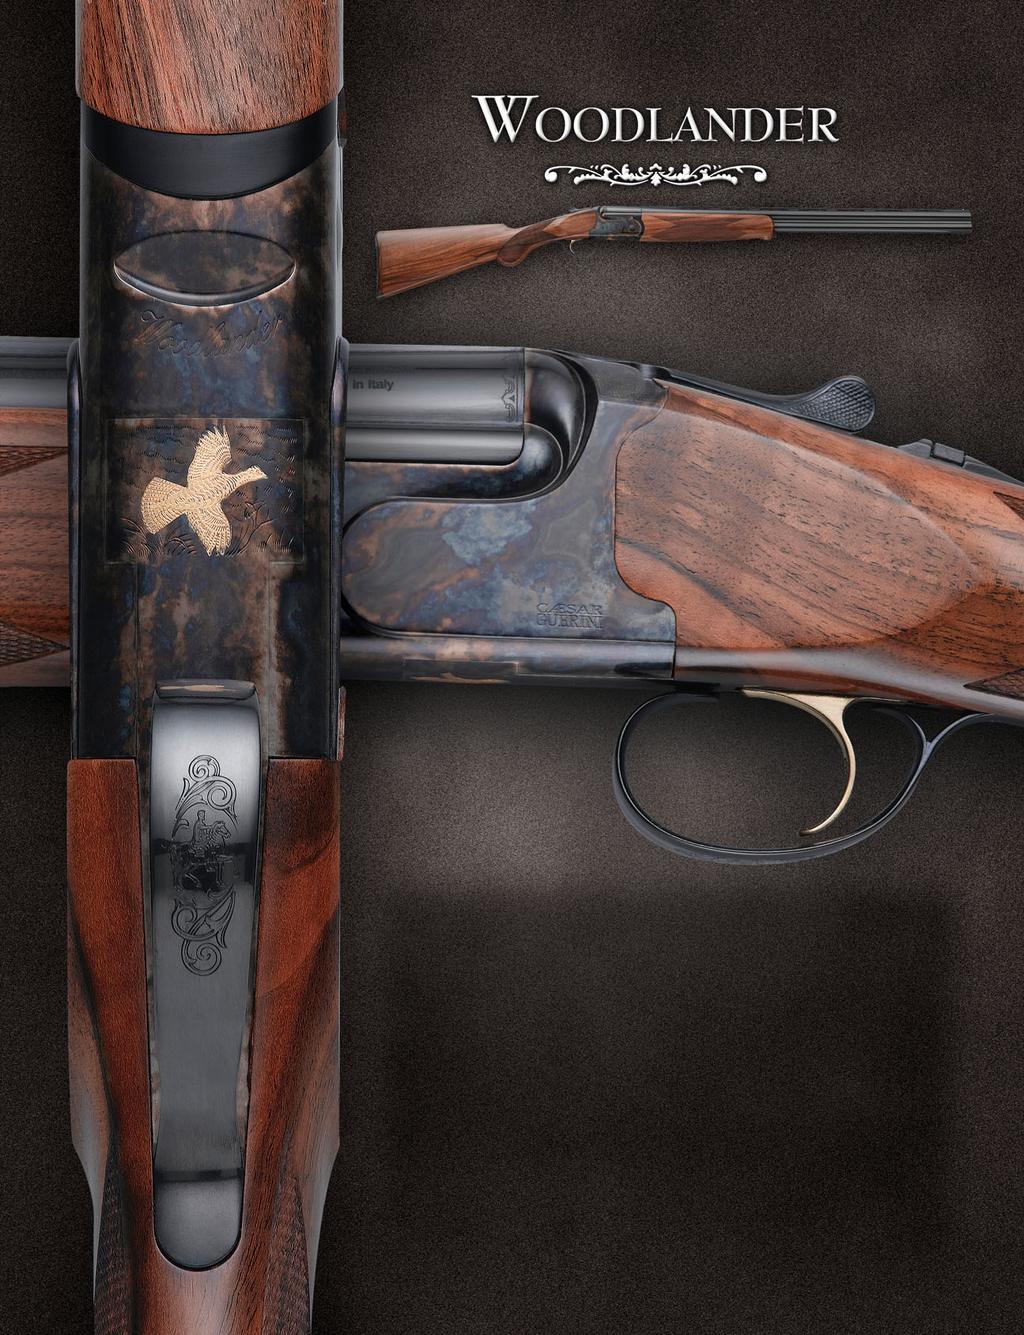 At Caesar Guerini upland bird hunting is a passion. We wanted a gun that would truly reflect our love of fall coverts, autumn foliage, wet gundogs, and the smell of wood smoke.